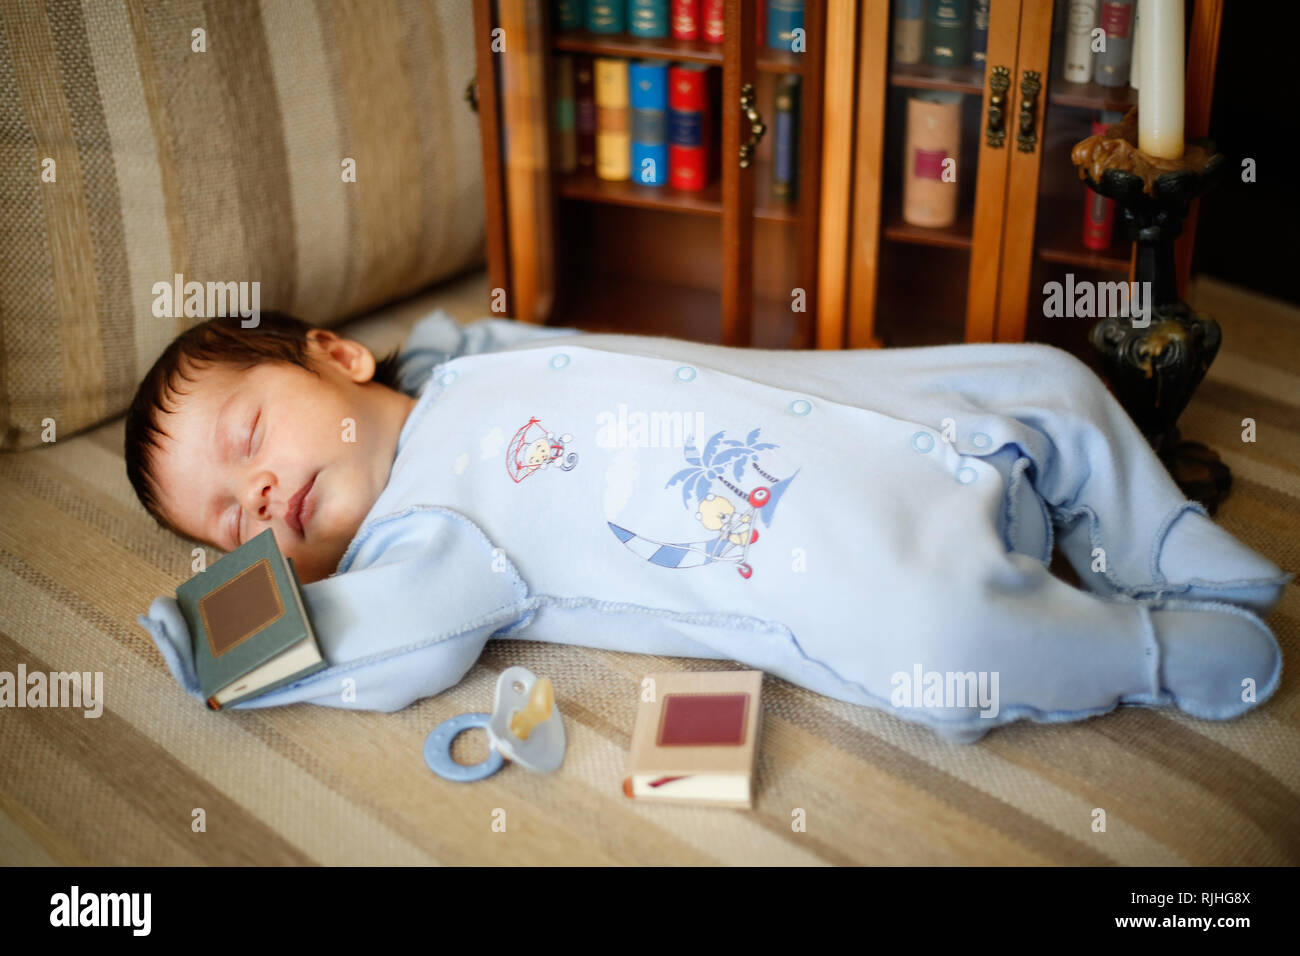 The kid fell asleep on the couch near the closet with books Stock Photo